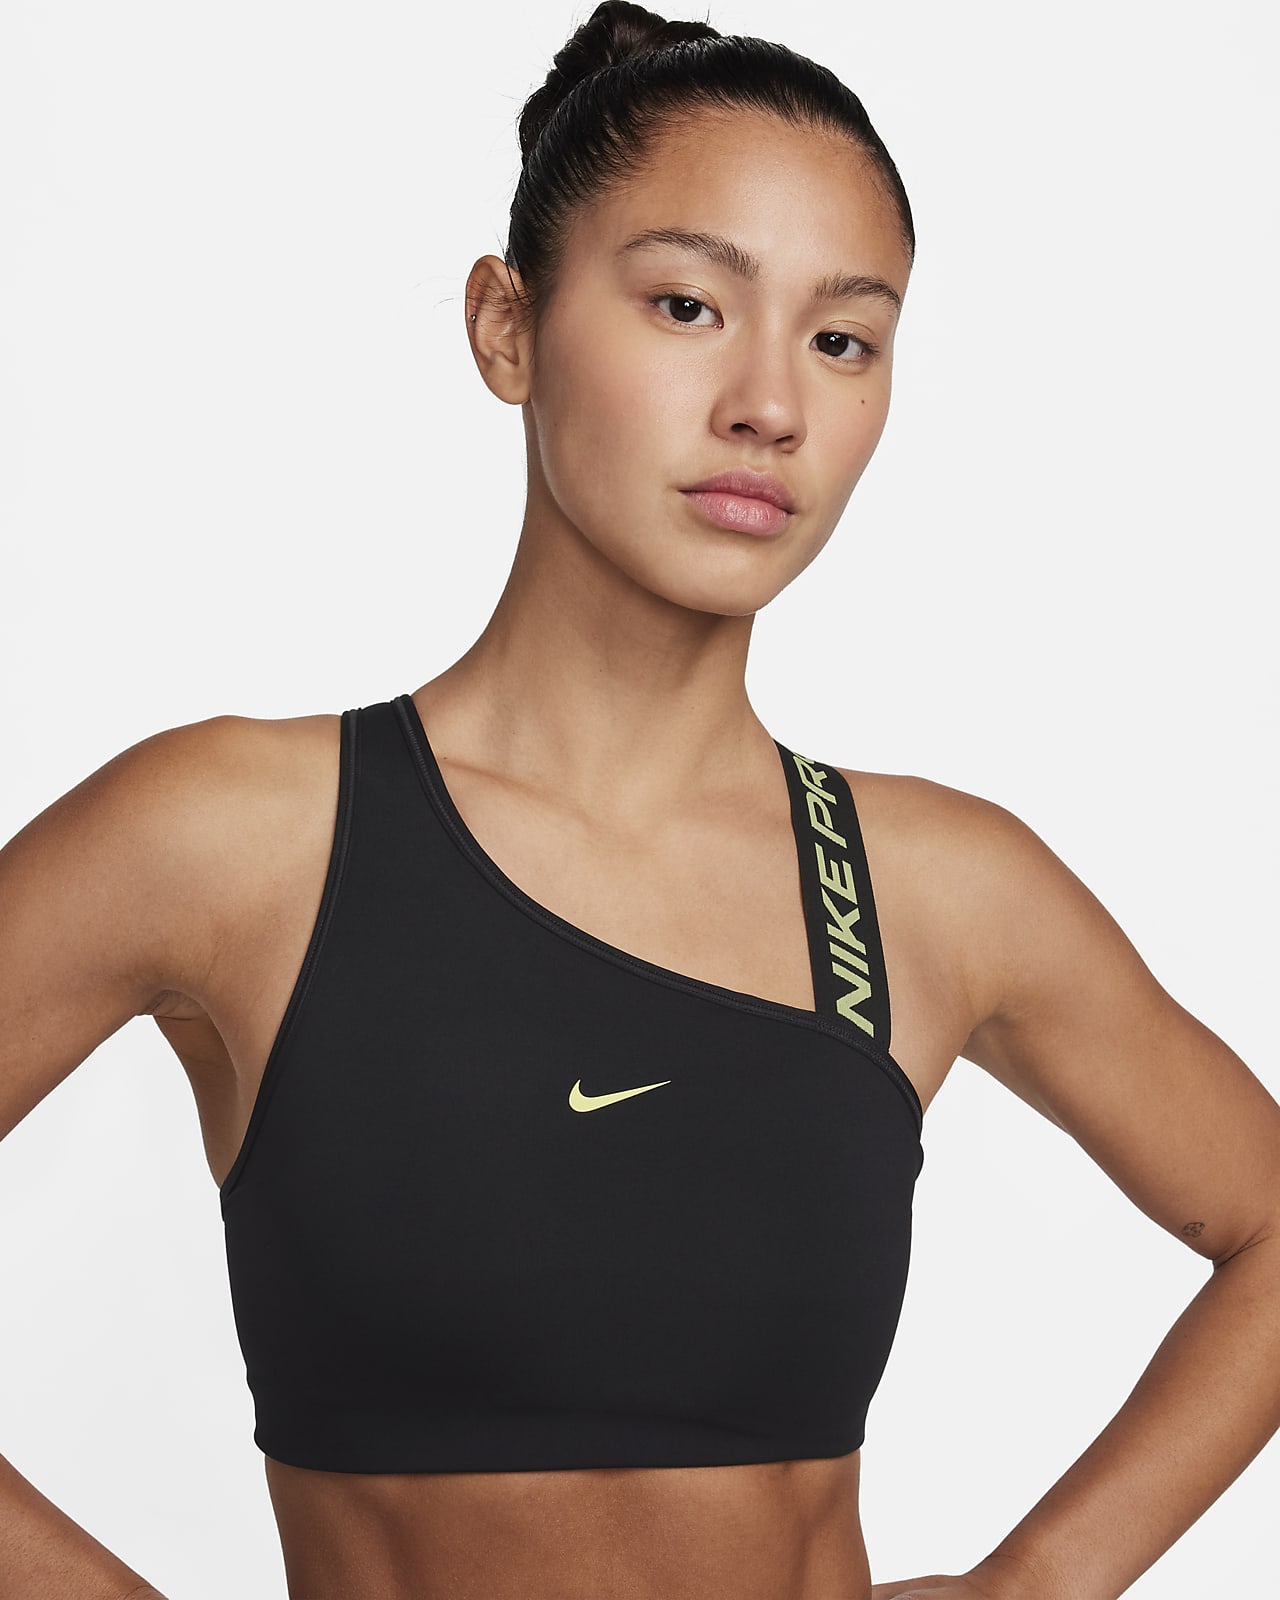 Shop Women's Usa Pro Sports Bras up to 80% Off